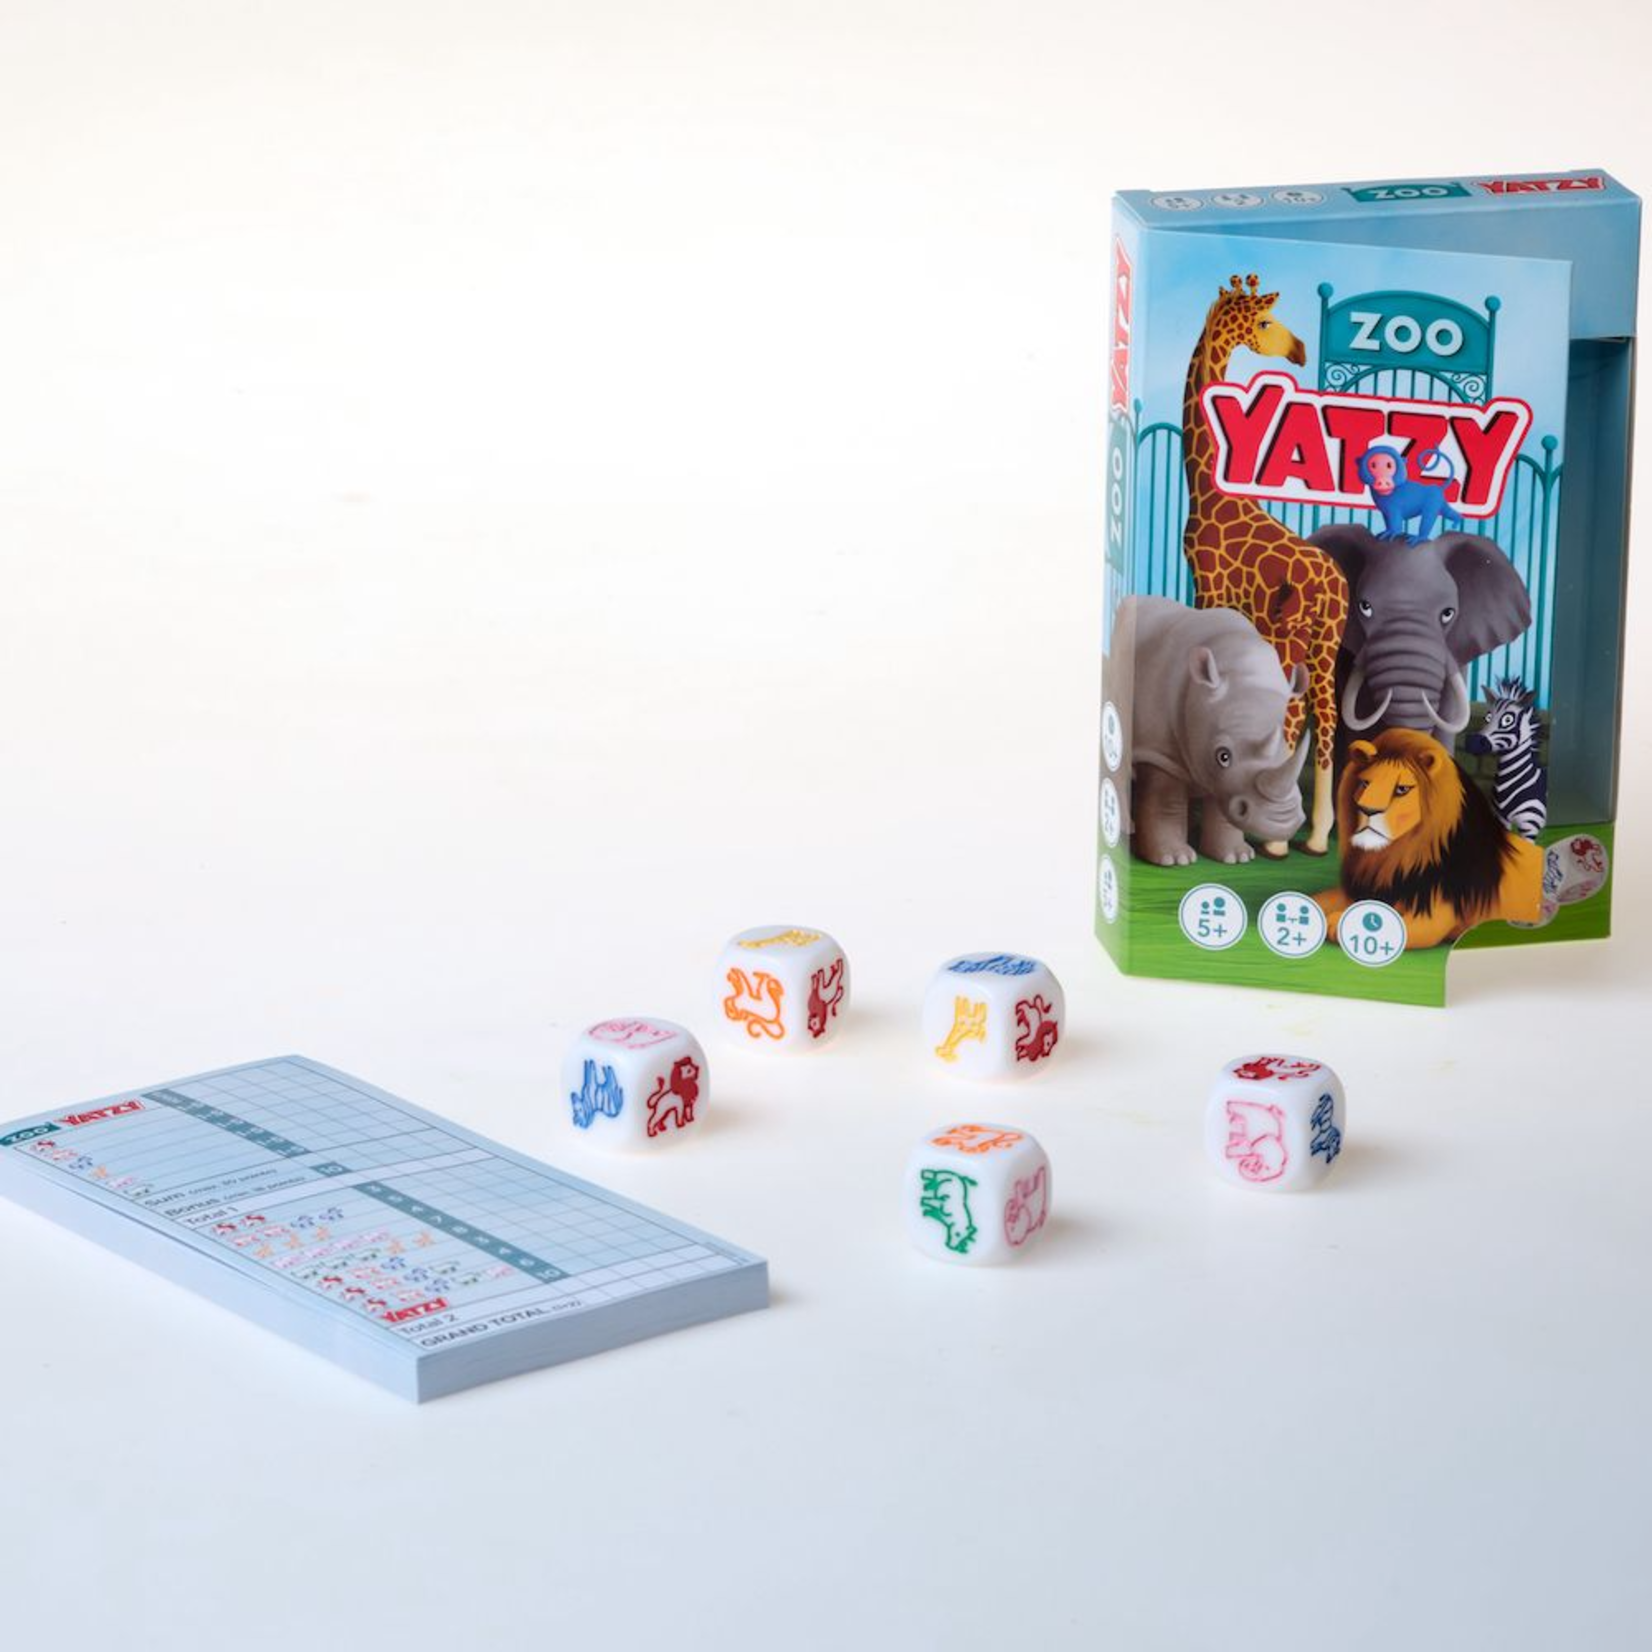 Smart Games & Toys Yatzy - Zoo